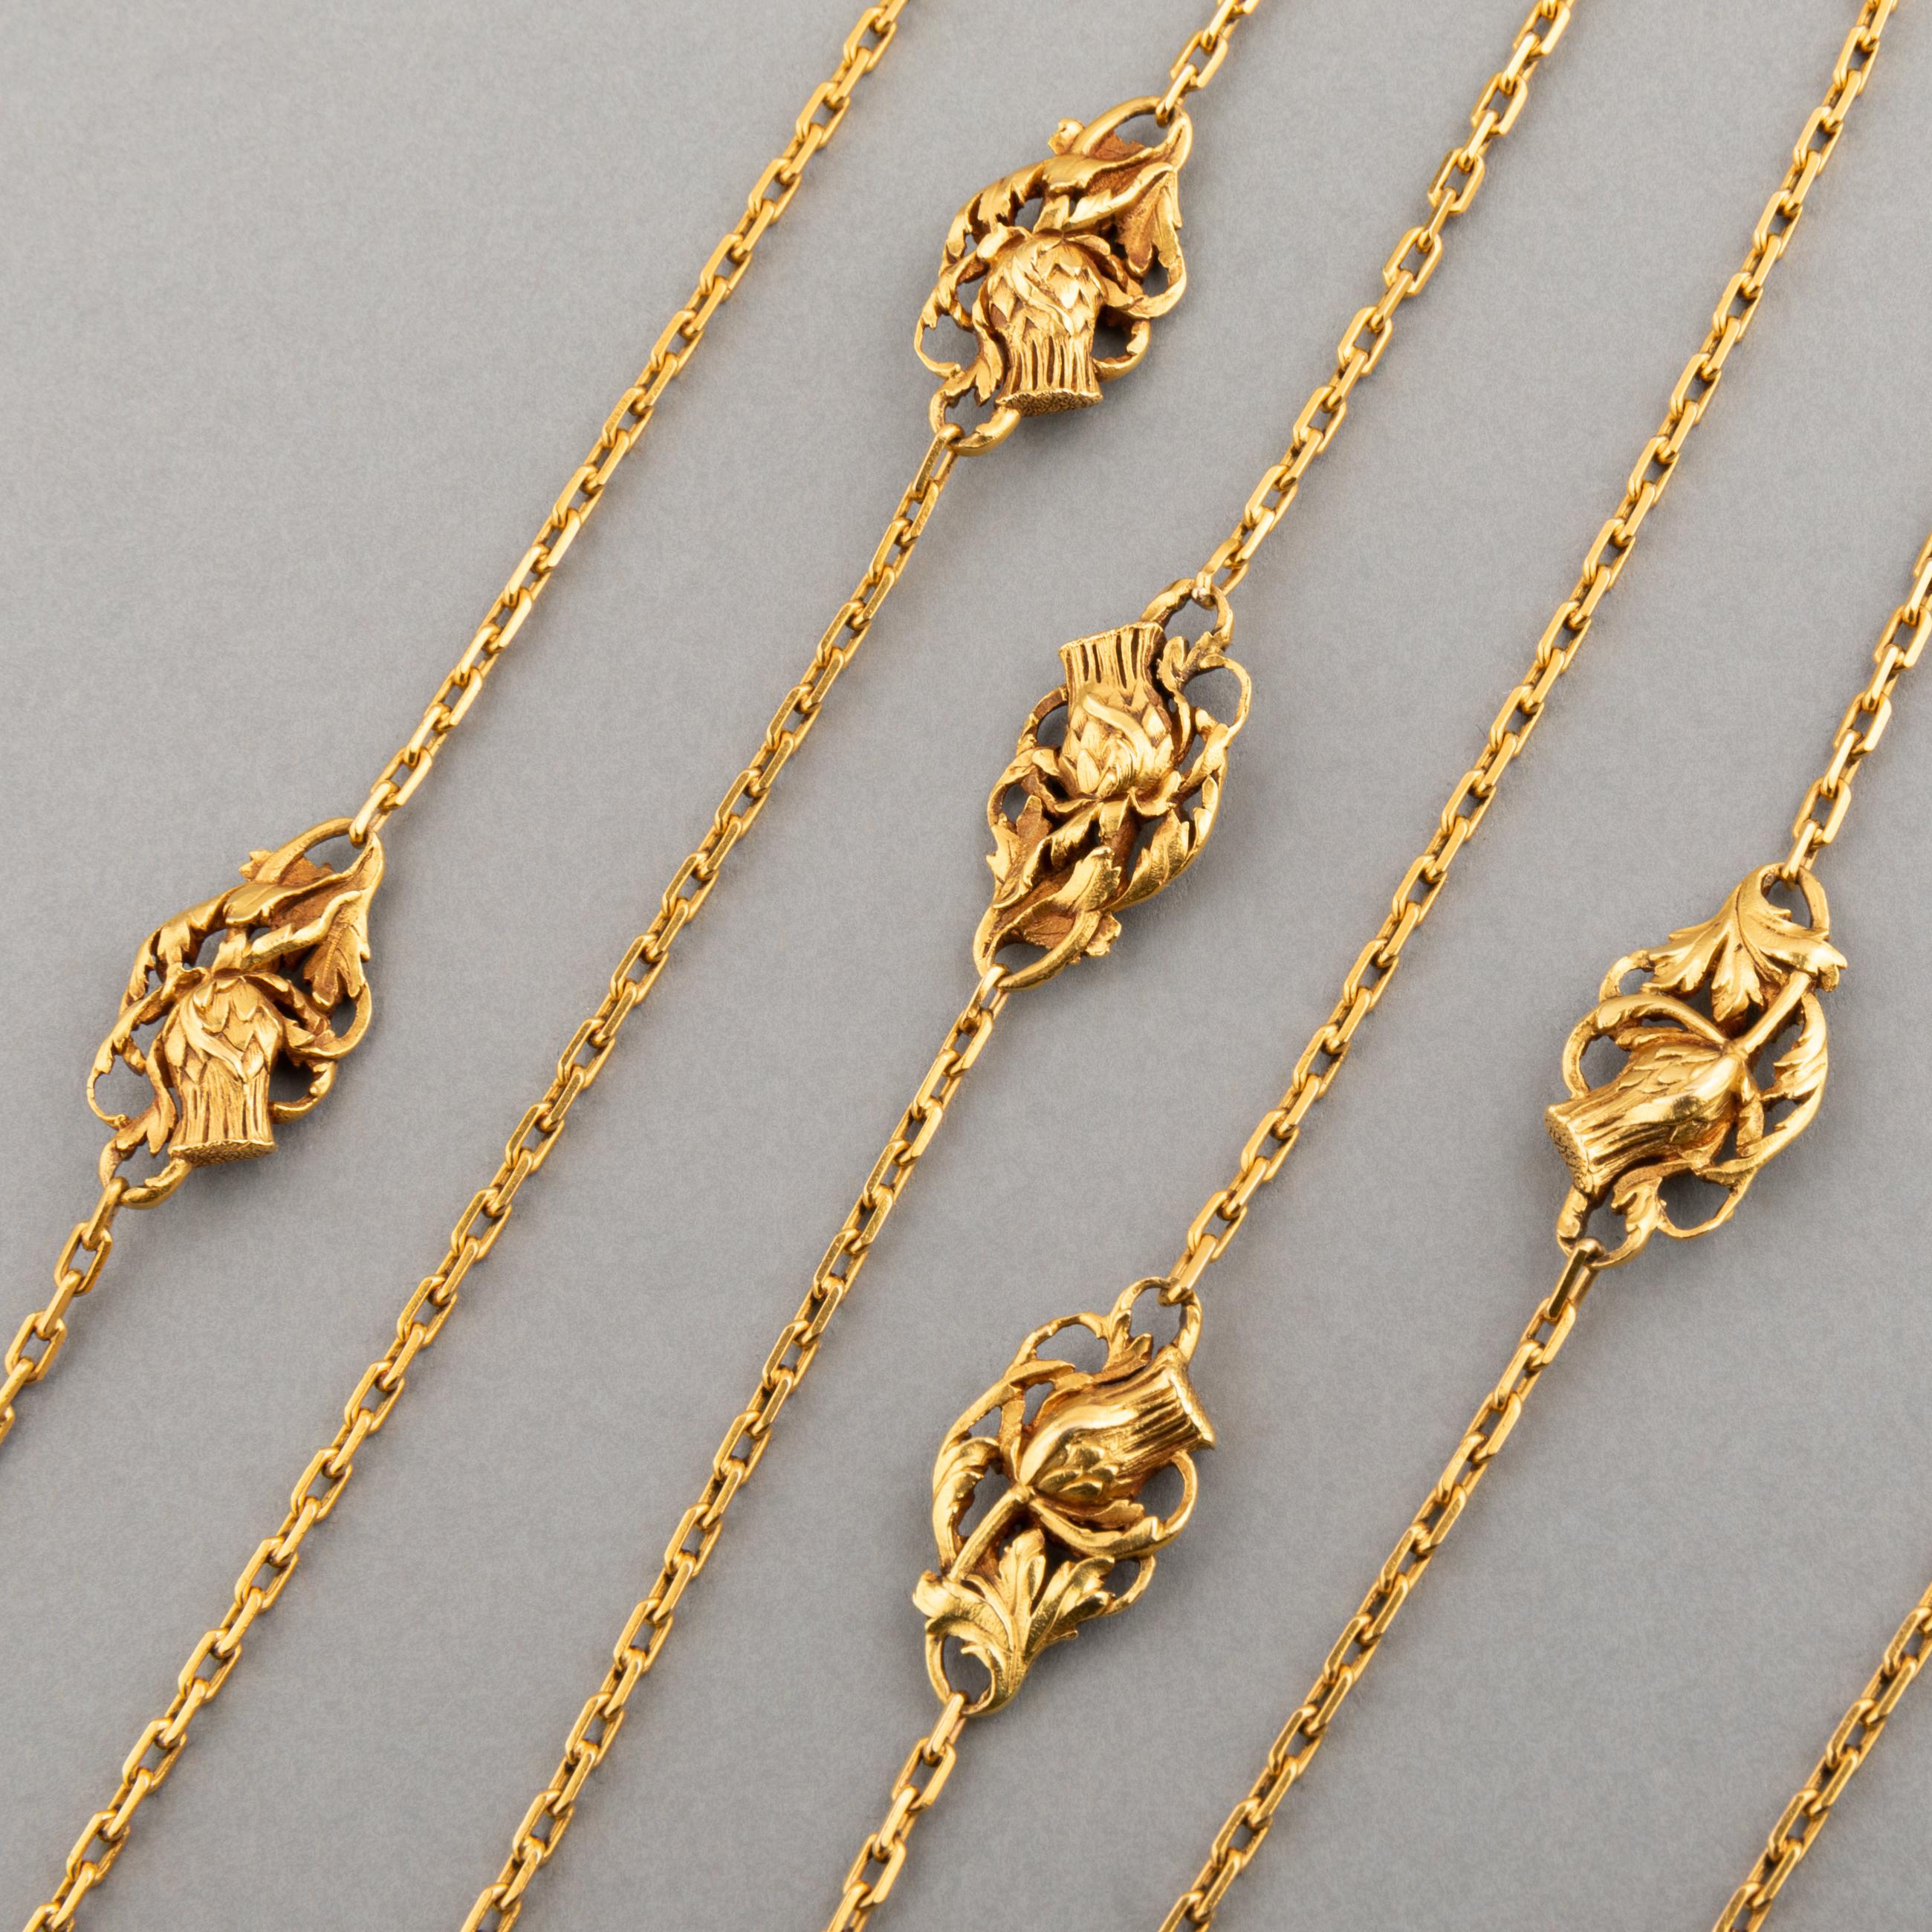 A very beautiful antique necklace, made in France circa 1890.

Made in yellow gold 20K (Mercure's Head with number 2). it is rare to found 20k antique French jewellery.

The length is 160cm or 3 turns. The Flower parterns measures